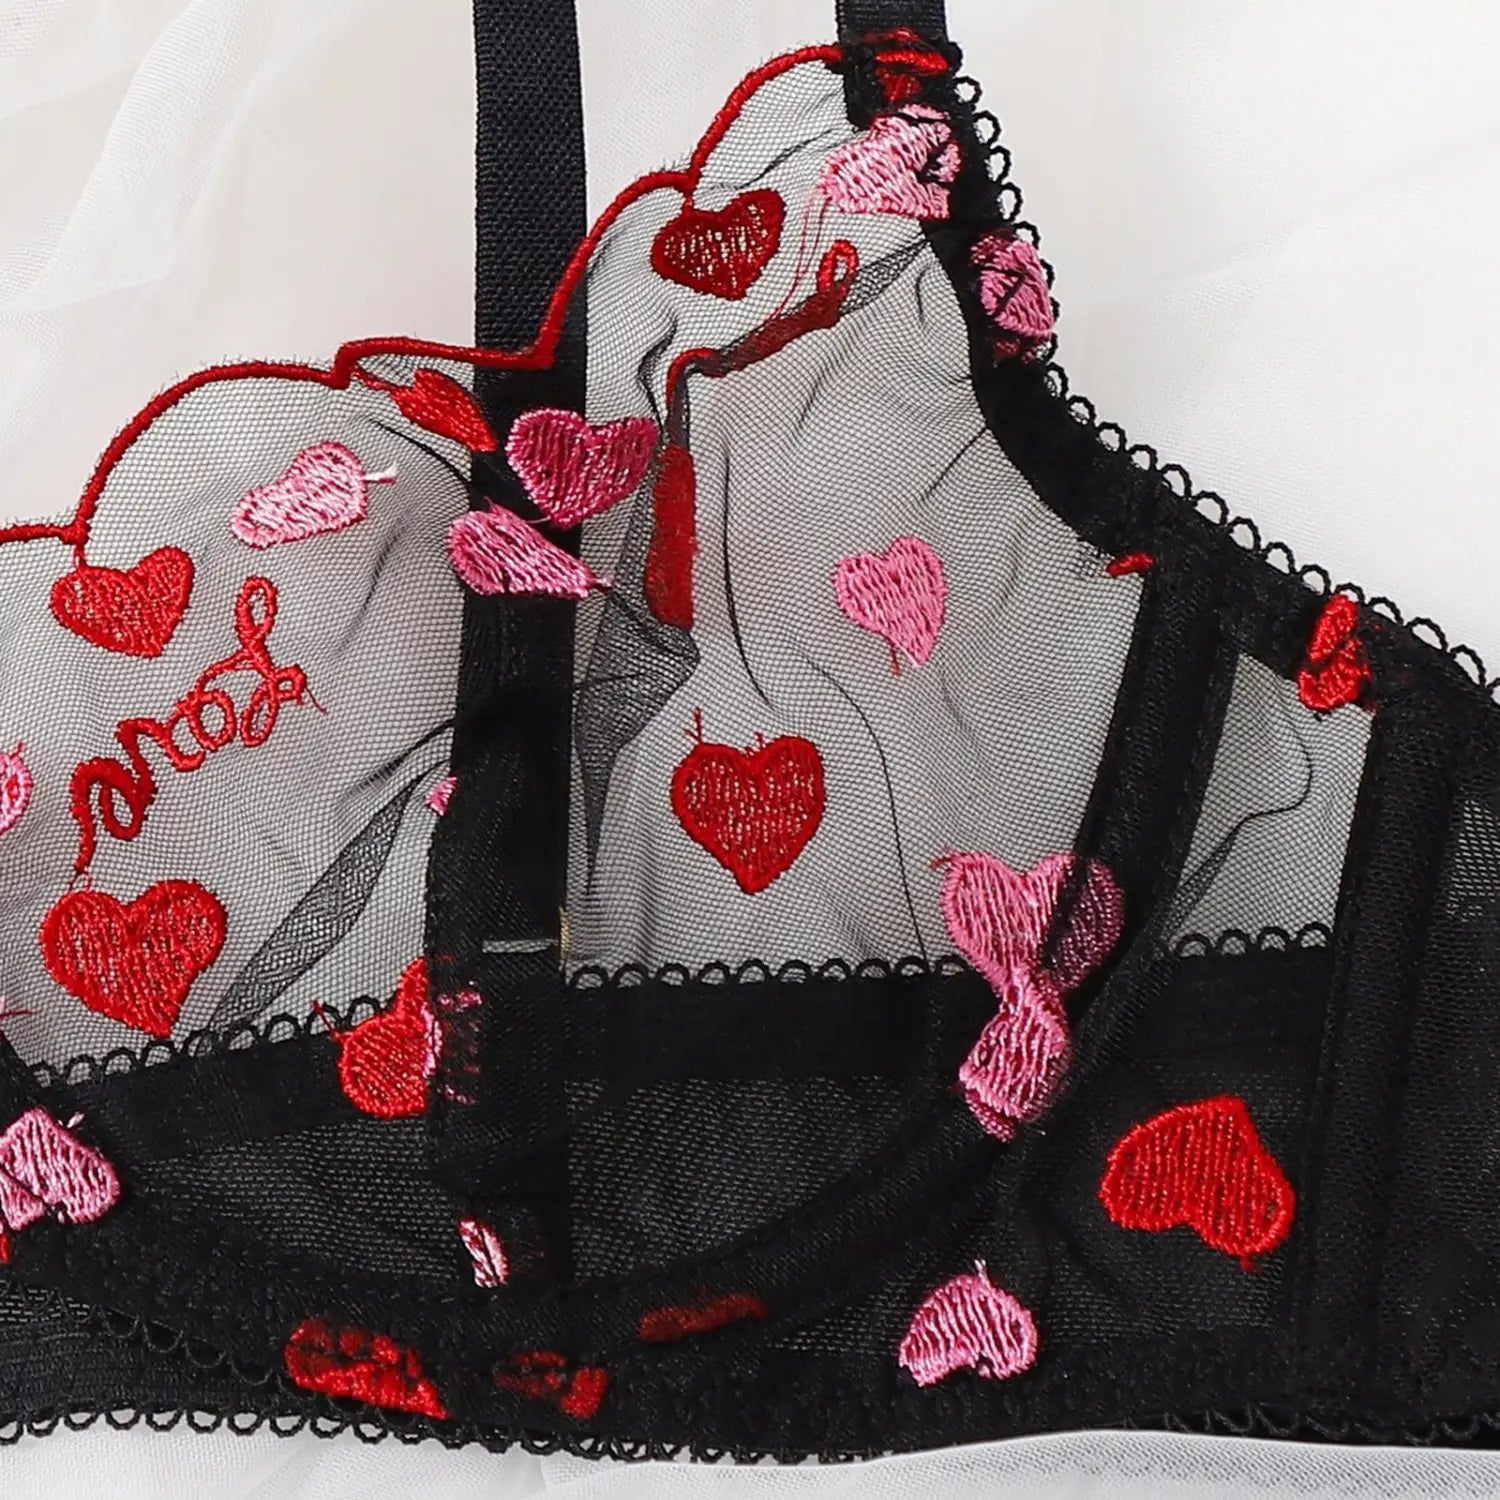 Pink Love Embroidered Lingerie - Enchanted Mesh Delight